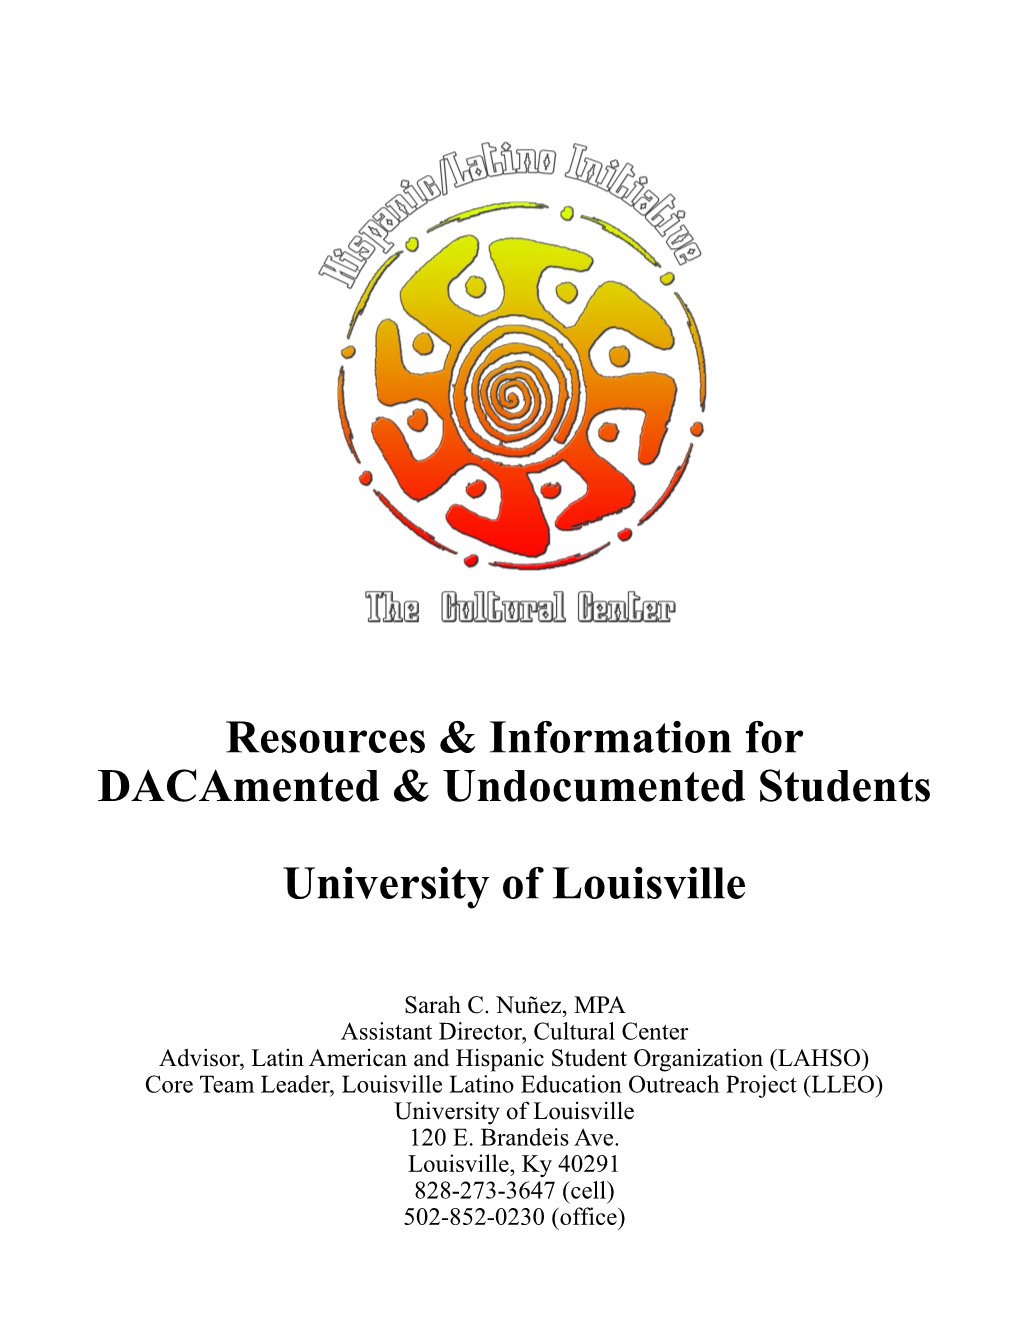 Resources & Information for Dacamented & Undocumented